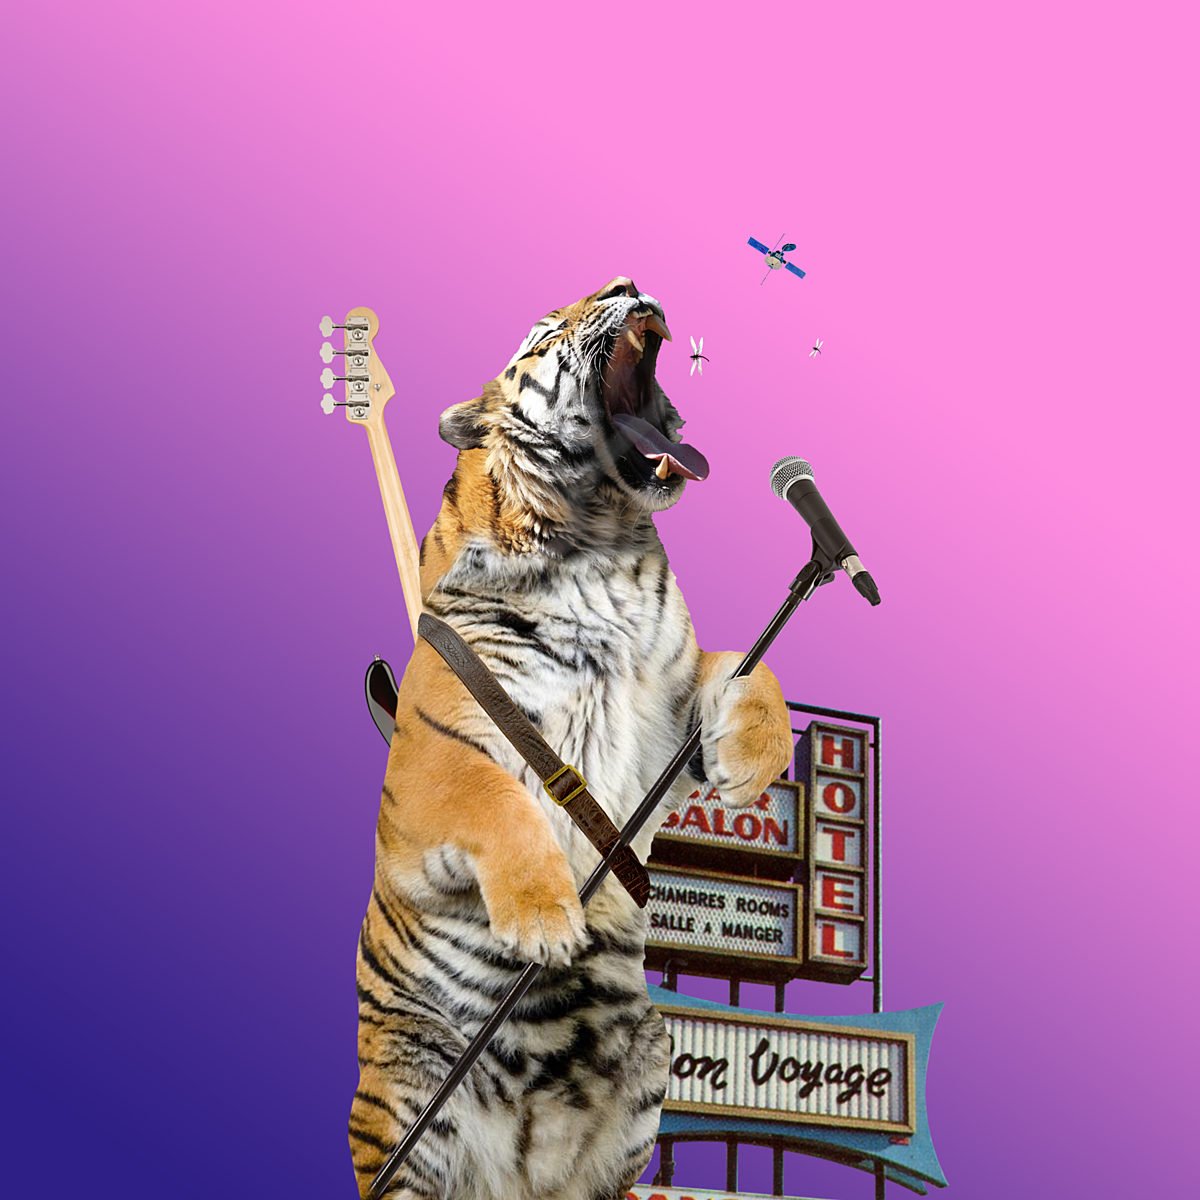 A standing tiger roaring into a microphone